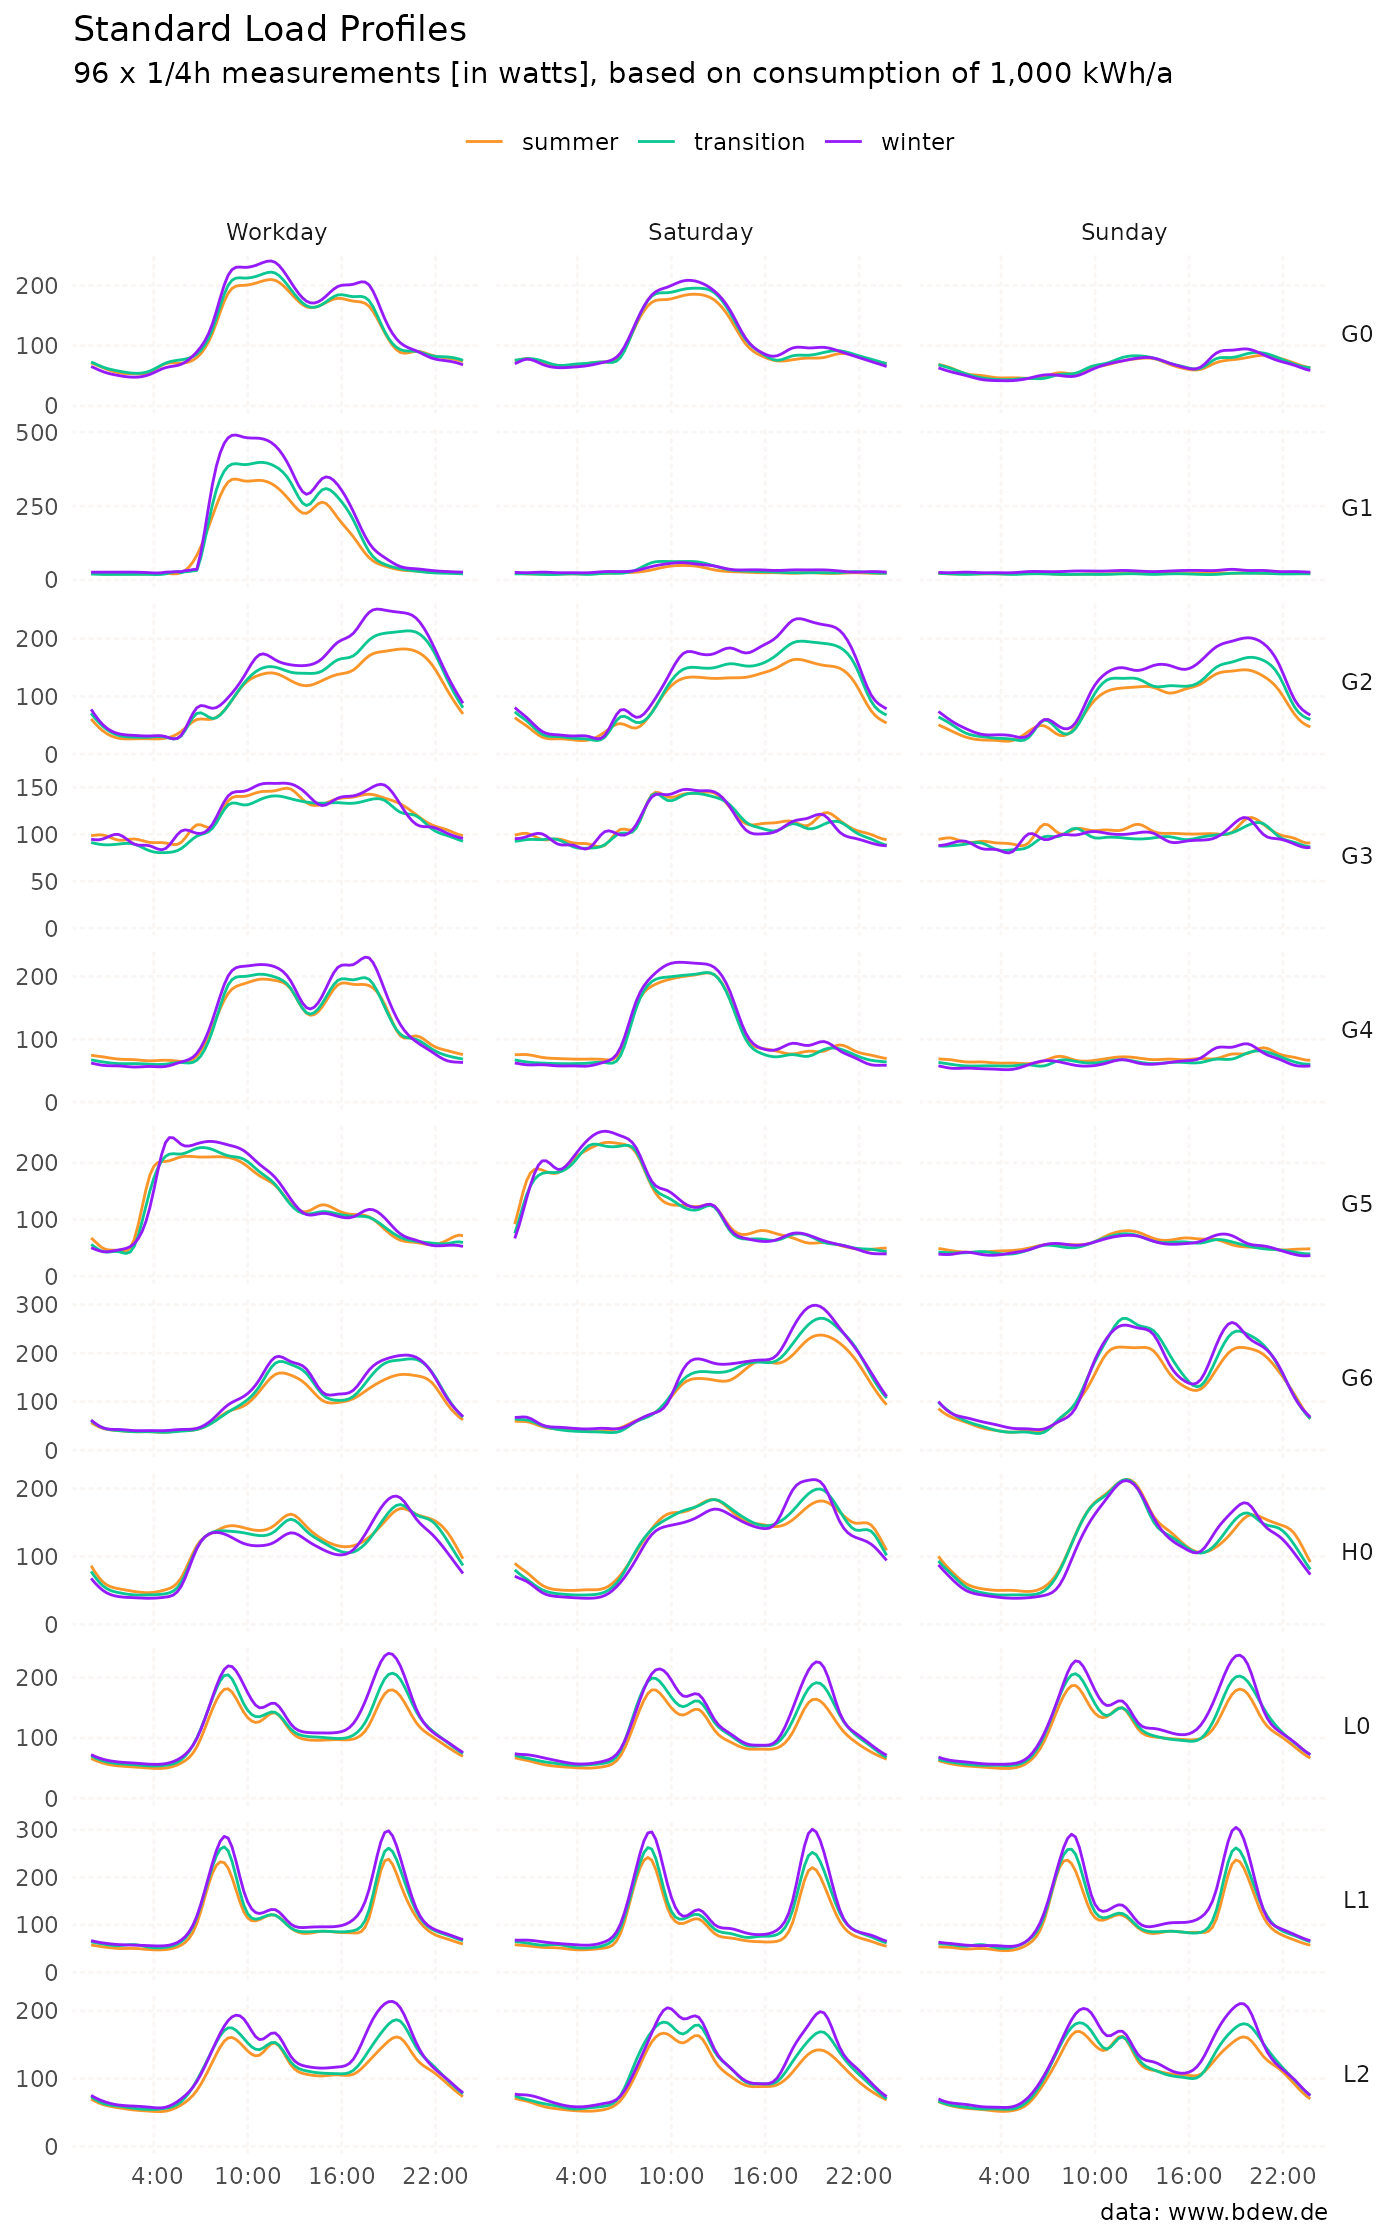 Small multiple line chart of 11 standard load profiles published by the German Association of Energy and Water Industries (BDEW Bundesverband der Energie- und Wasserwirtschaft e.V.). The lines compare the consumption for three different periods over a year, and also compare the consumption between different days of a week.